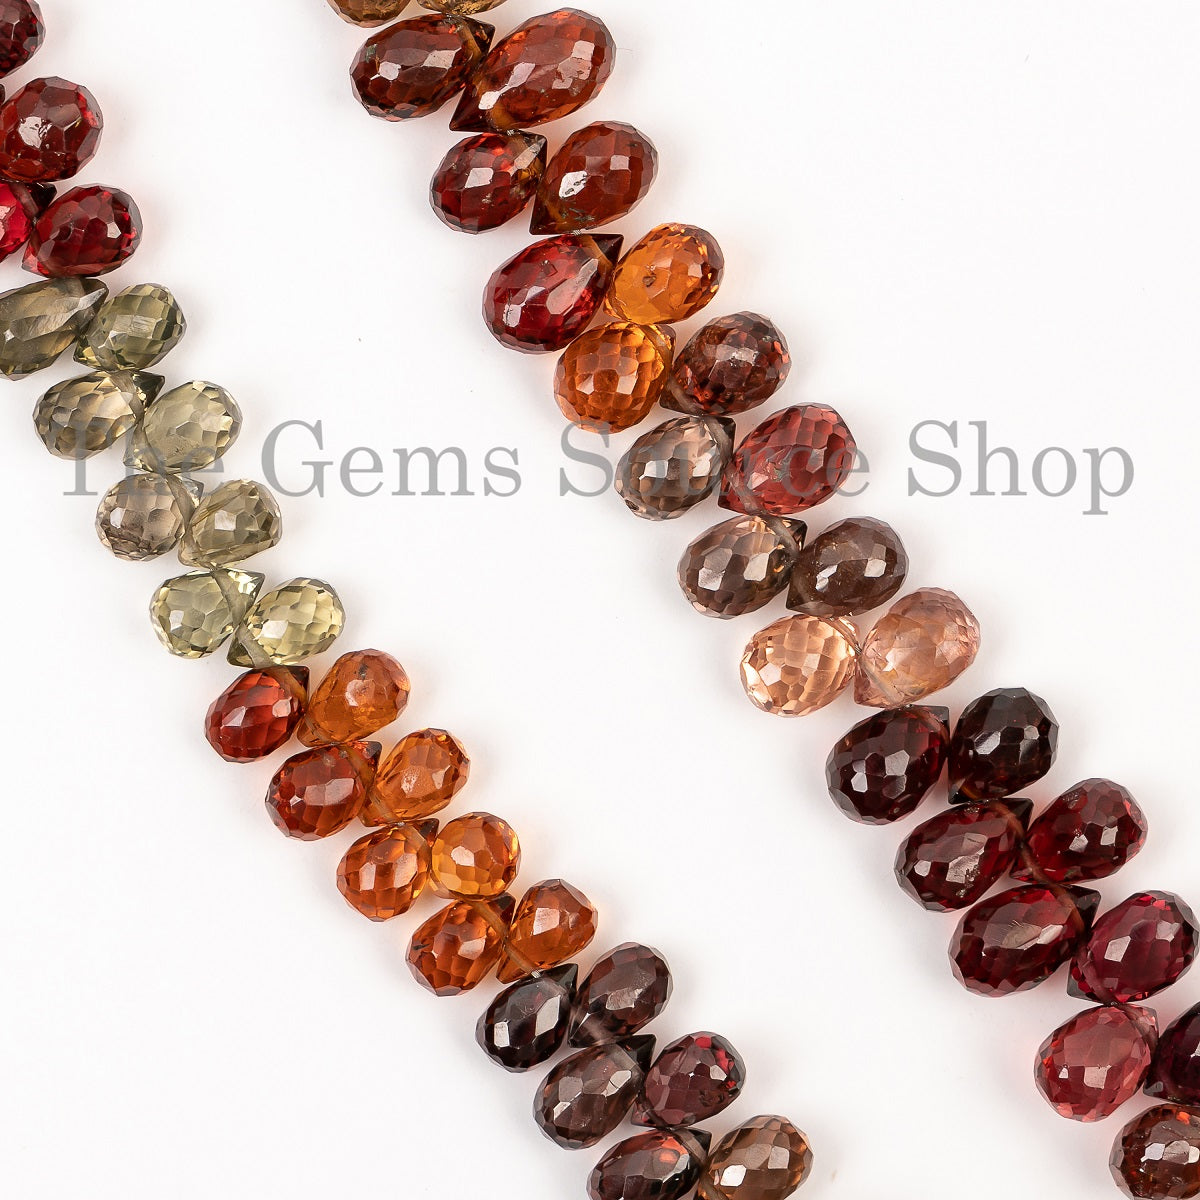 Tundra Sapphire Briolette Drops Beads, Loose Sapphire Beads, Faceted Drops Beads